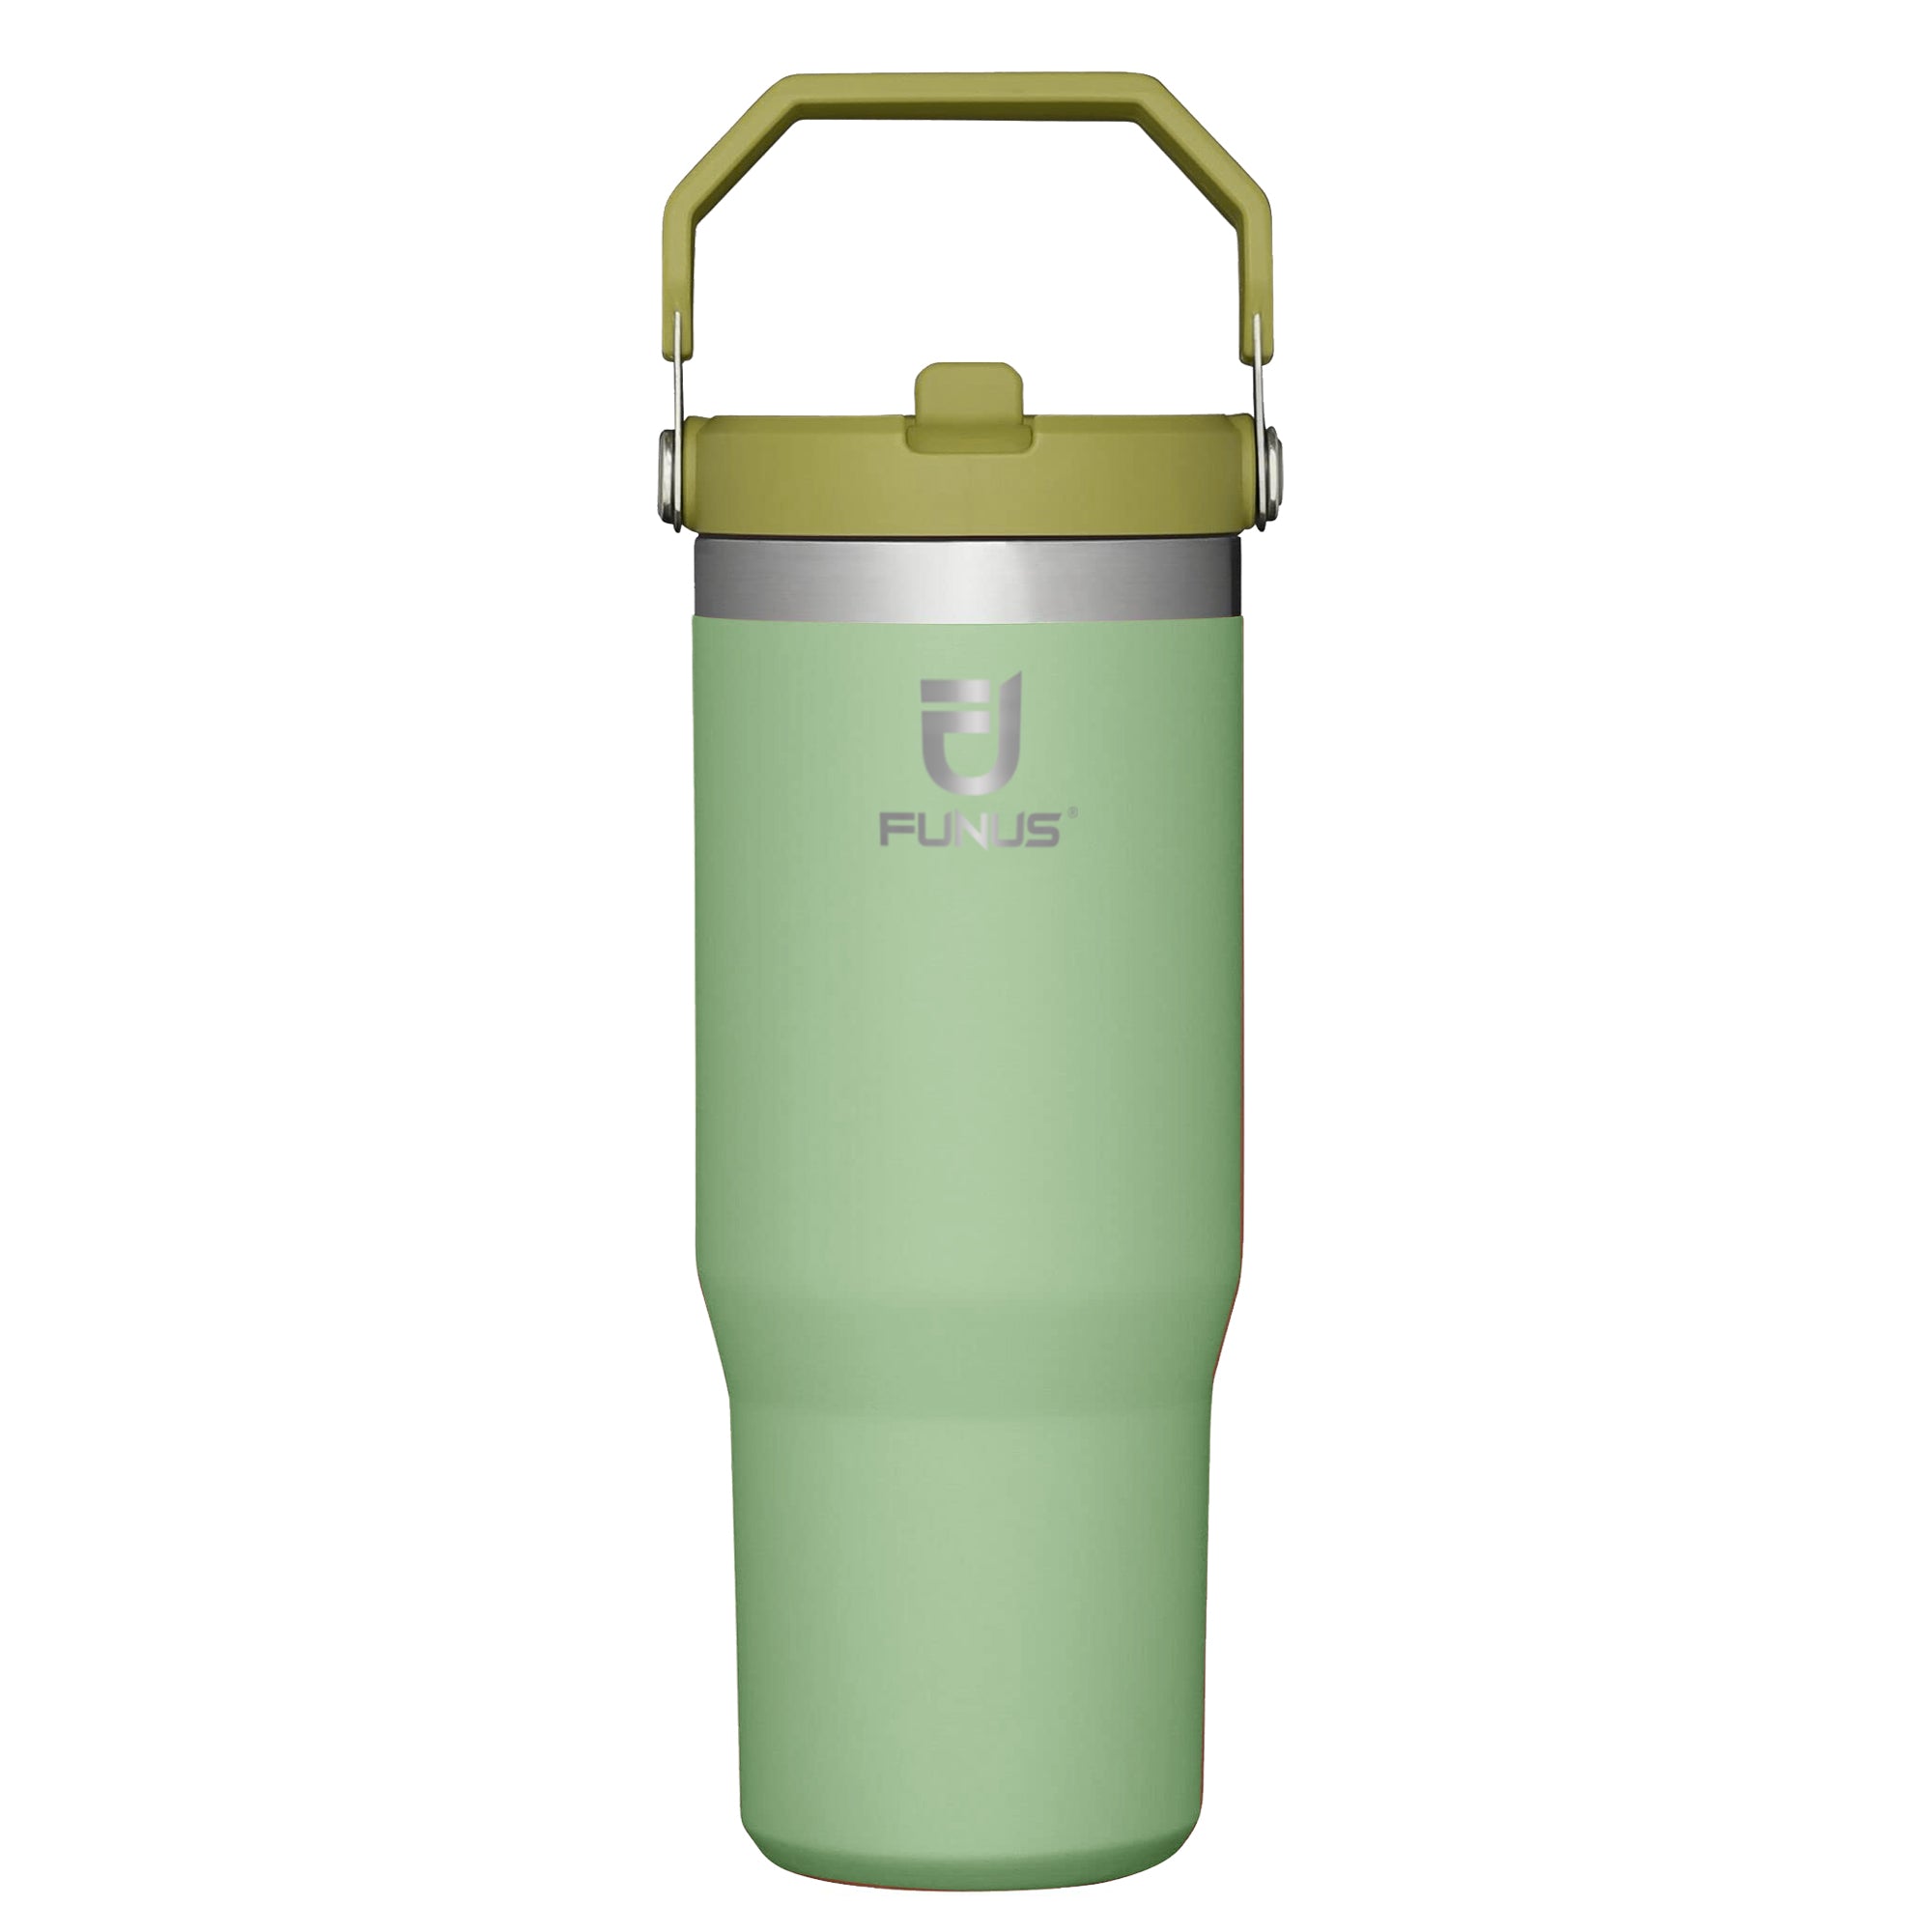 Stanley IceFlow Stainless Steel Tumbler With Straw, Vacuum Insulated Water  Bottle For Home, Office Or Car